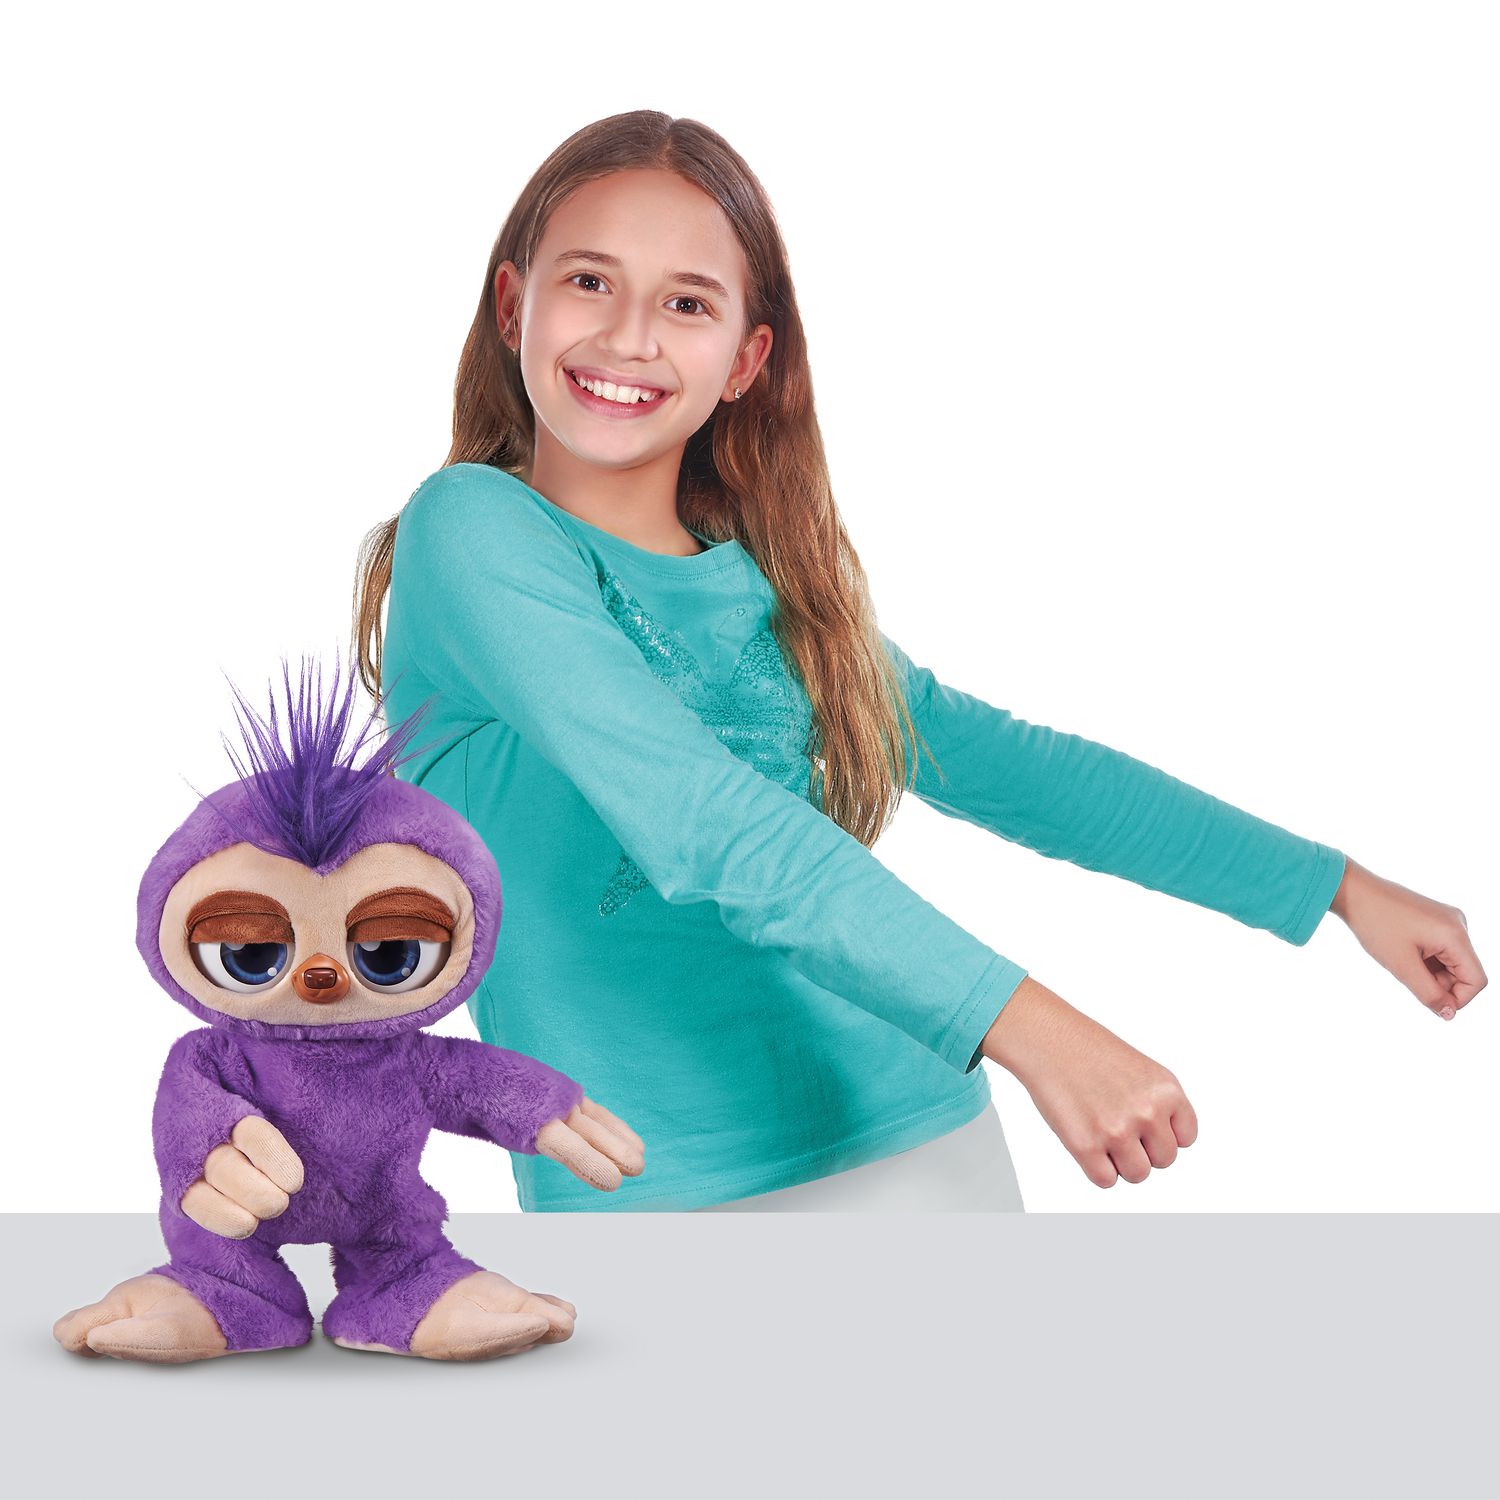 Pets Alive Fifi The Flossing Sloth Battery Powered Dancing Robotic Toy 2020 for sale online 